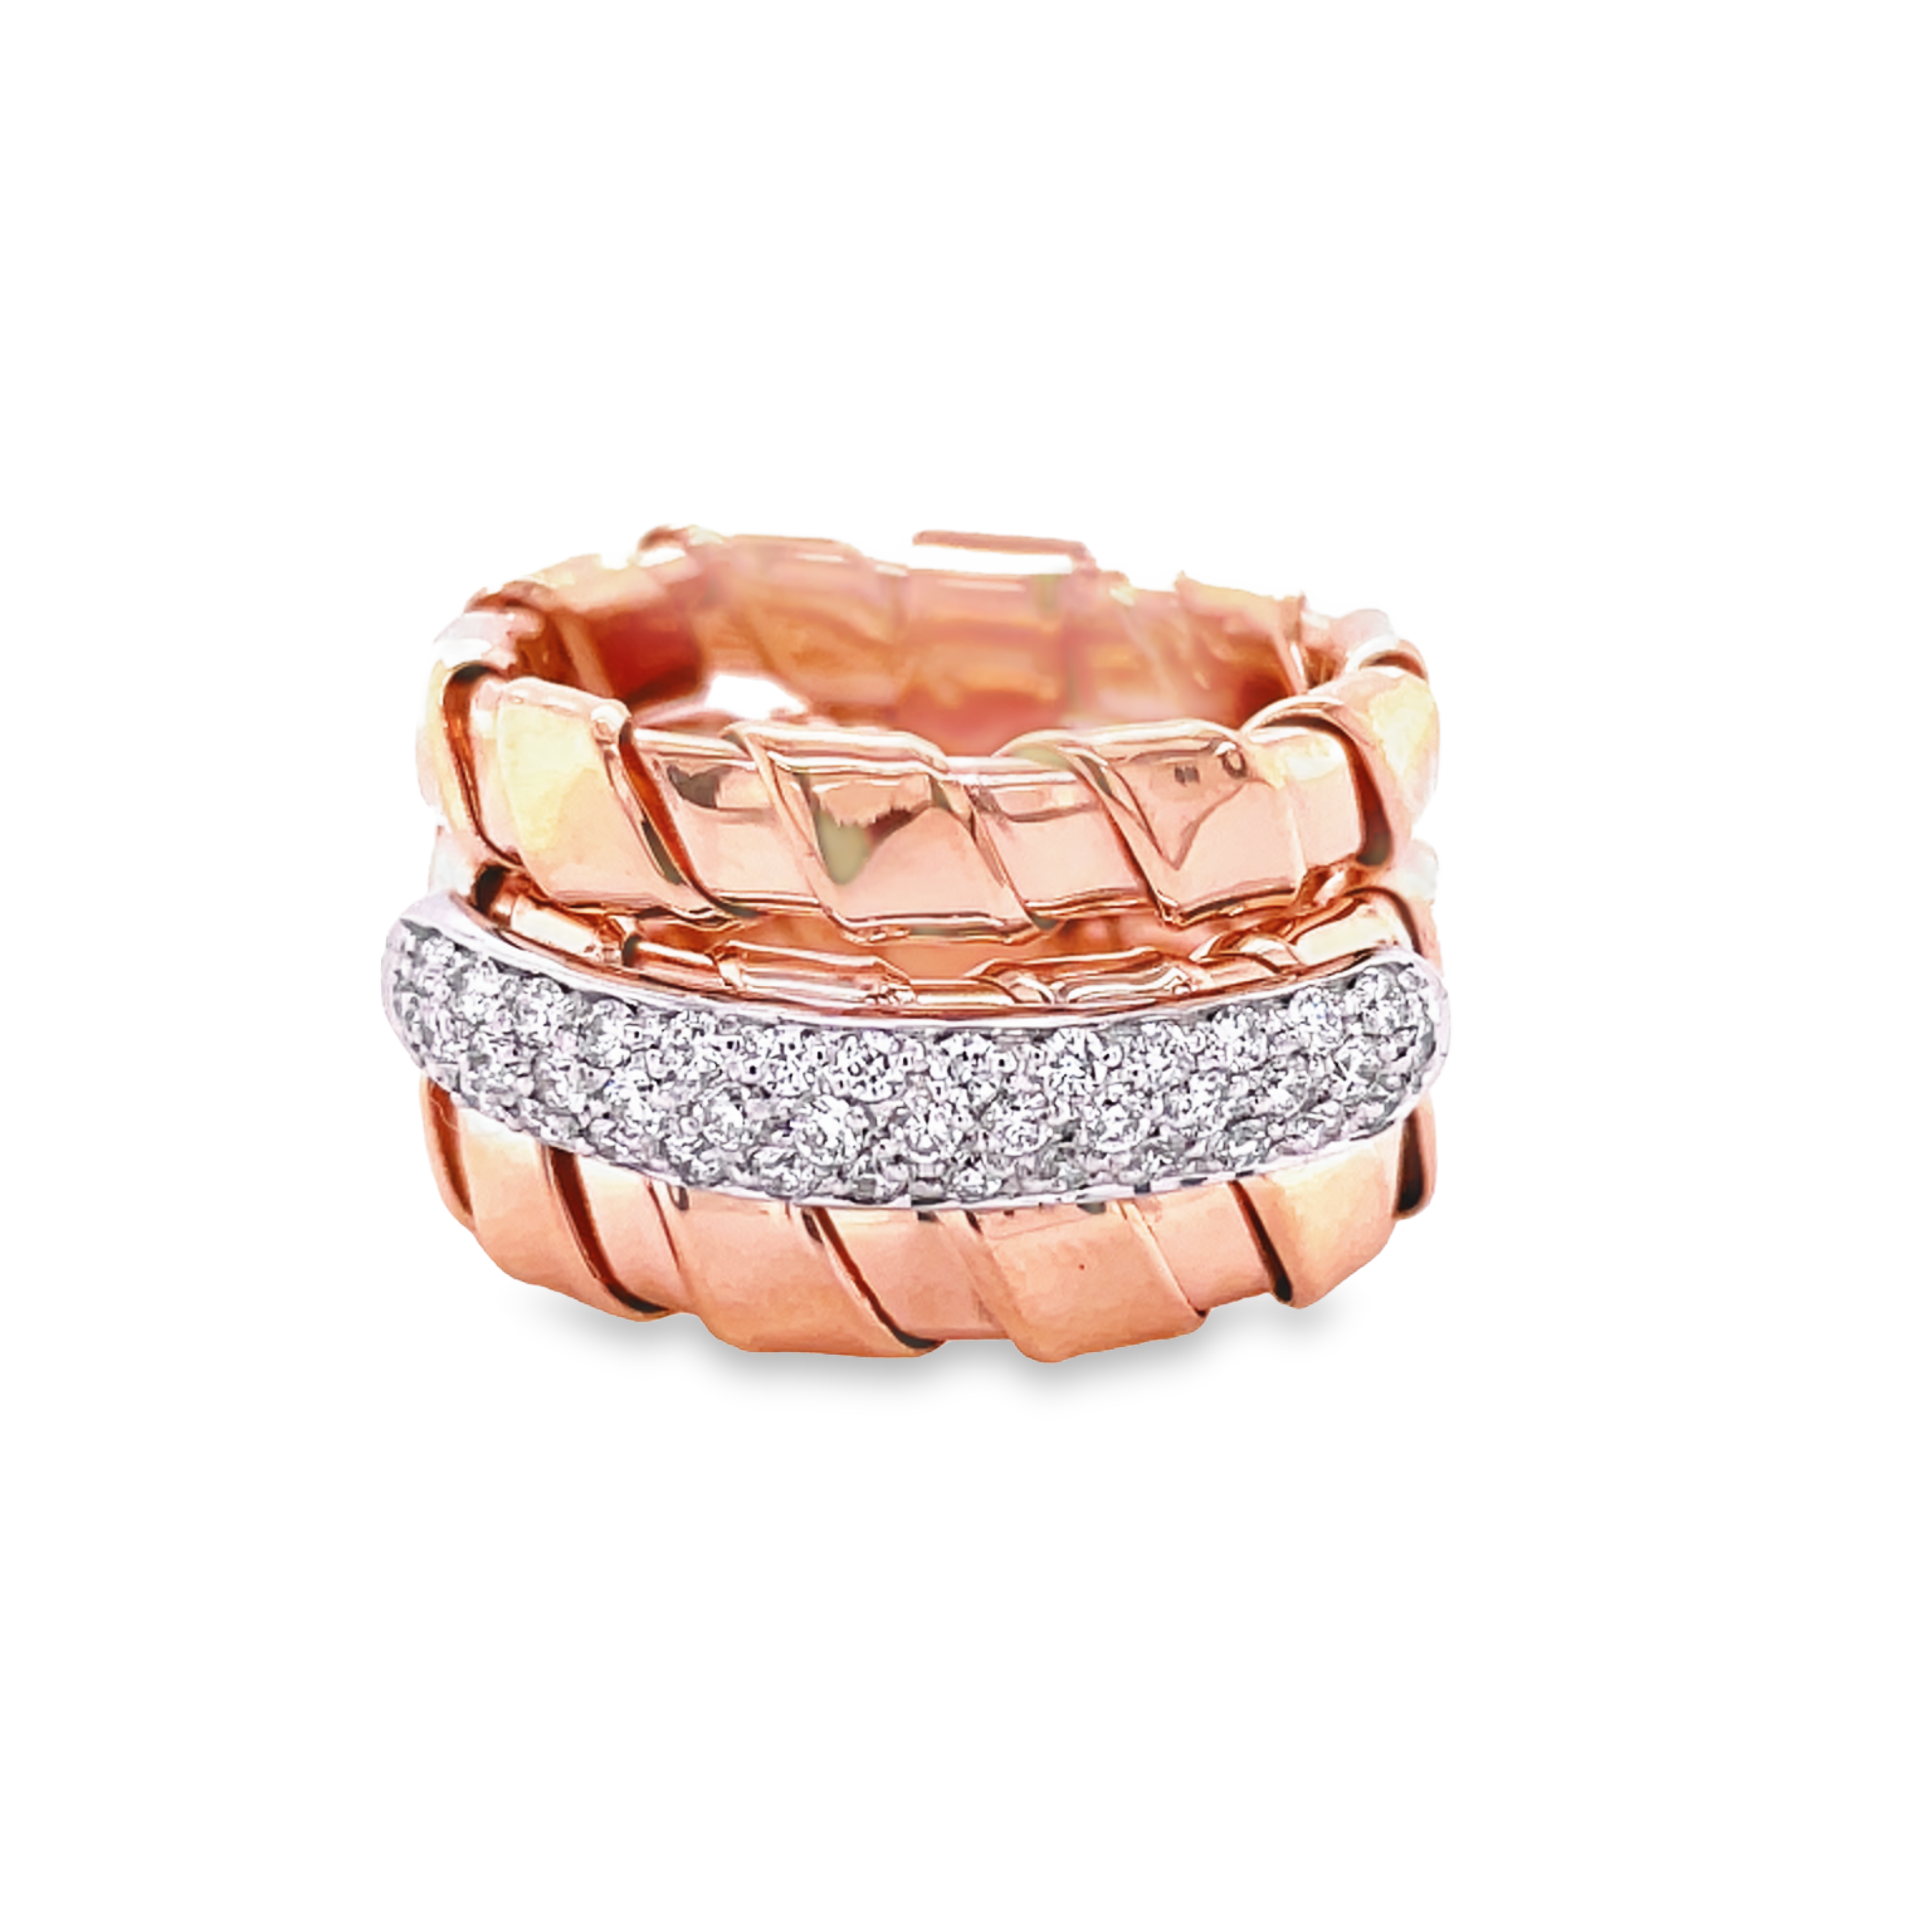 This luxurious ring will have you mesmerized. Crafted with Italian made innovative Tubo gas technique for extra flexibility, it features a classic and contemporary design with 18k rose gold and round diamonds, totaling 0.40 cts for a 13.00 mm width.